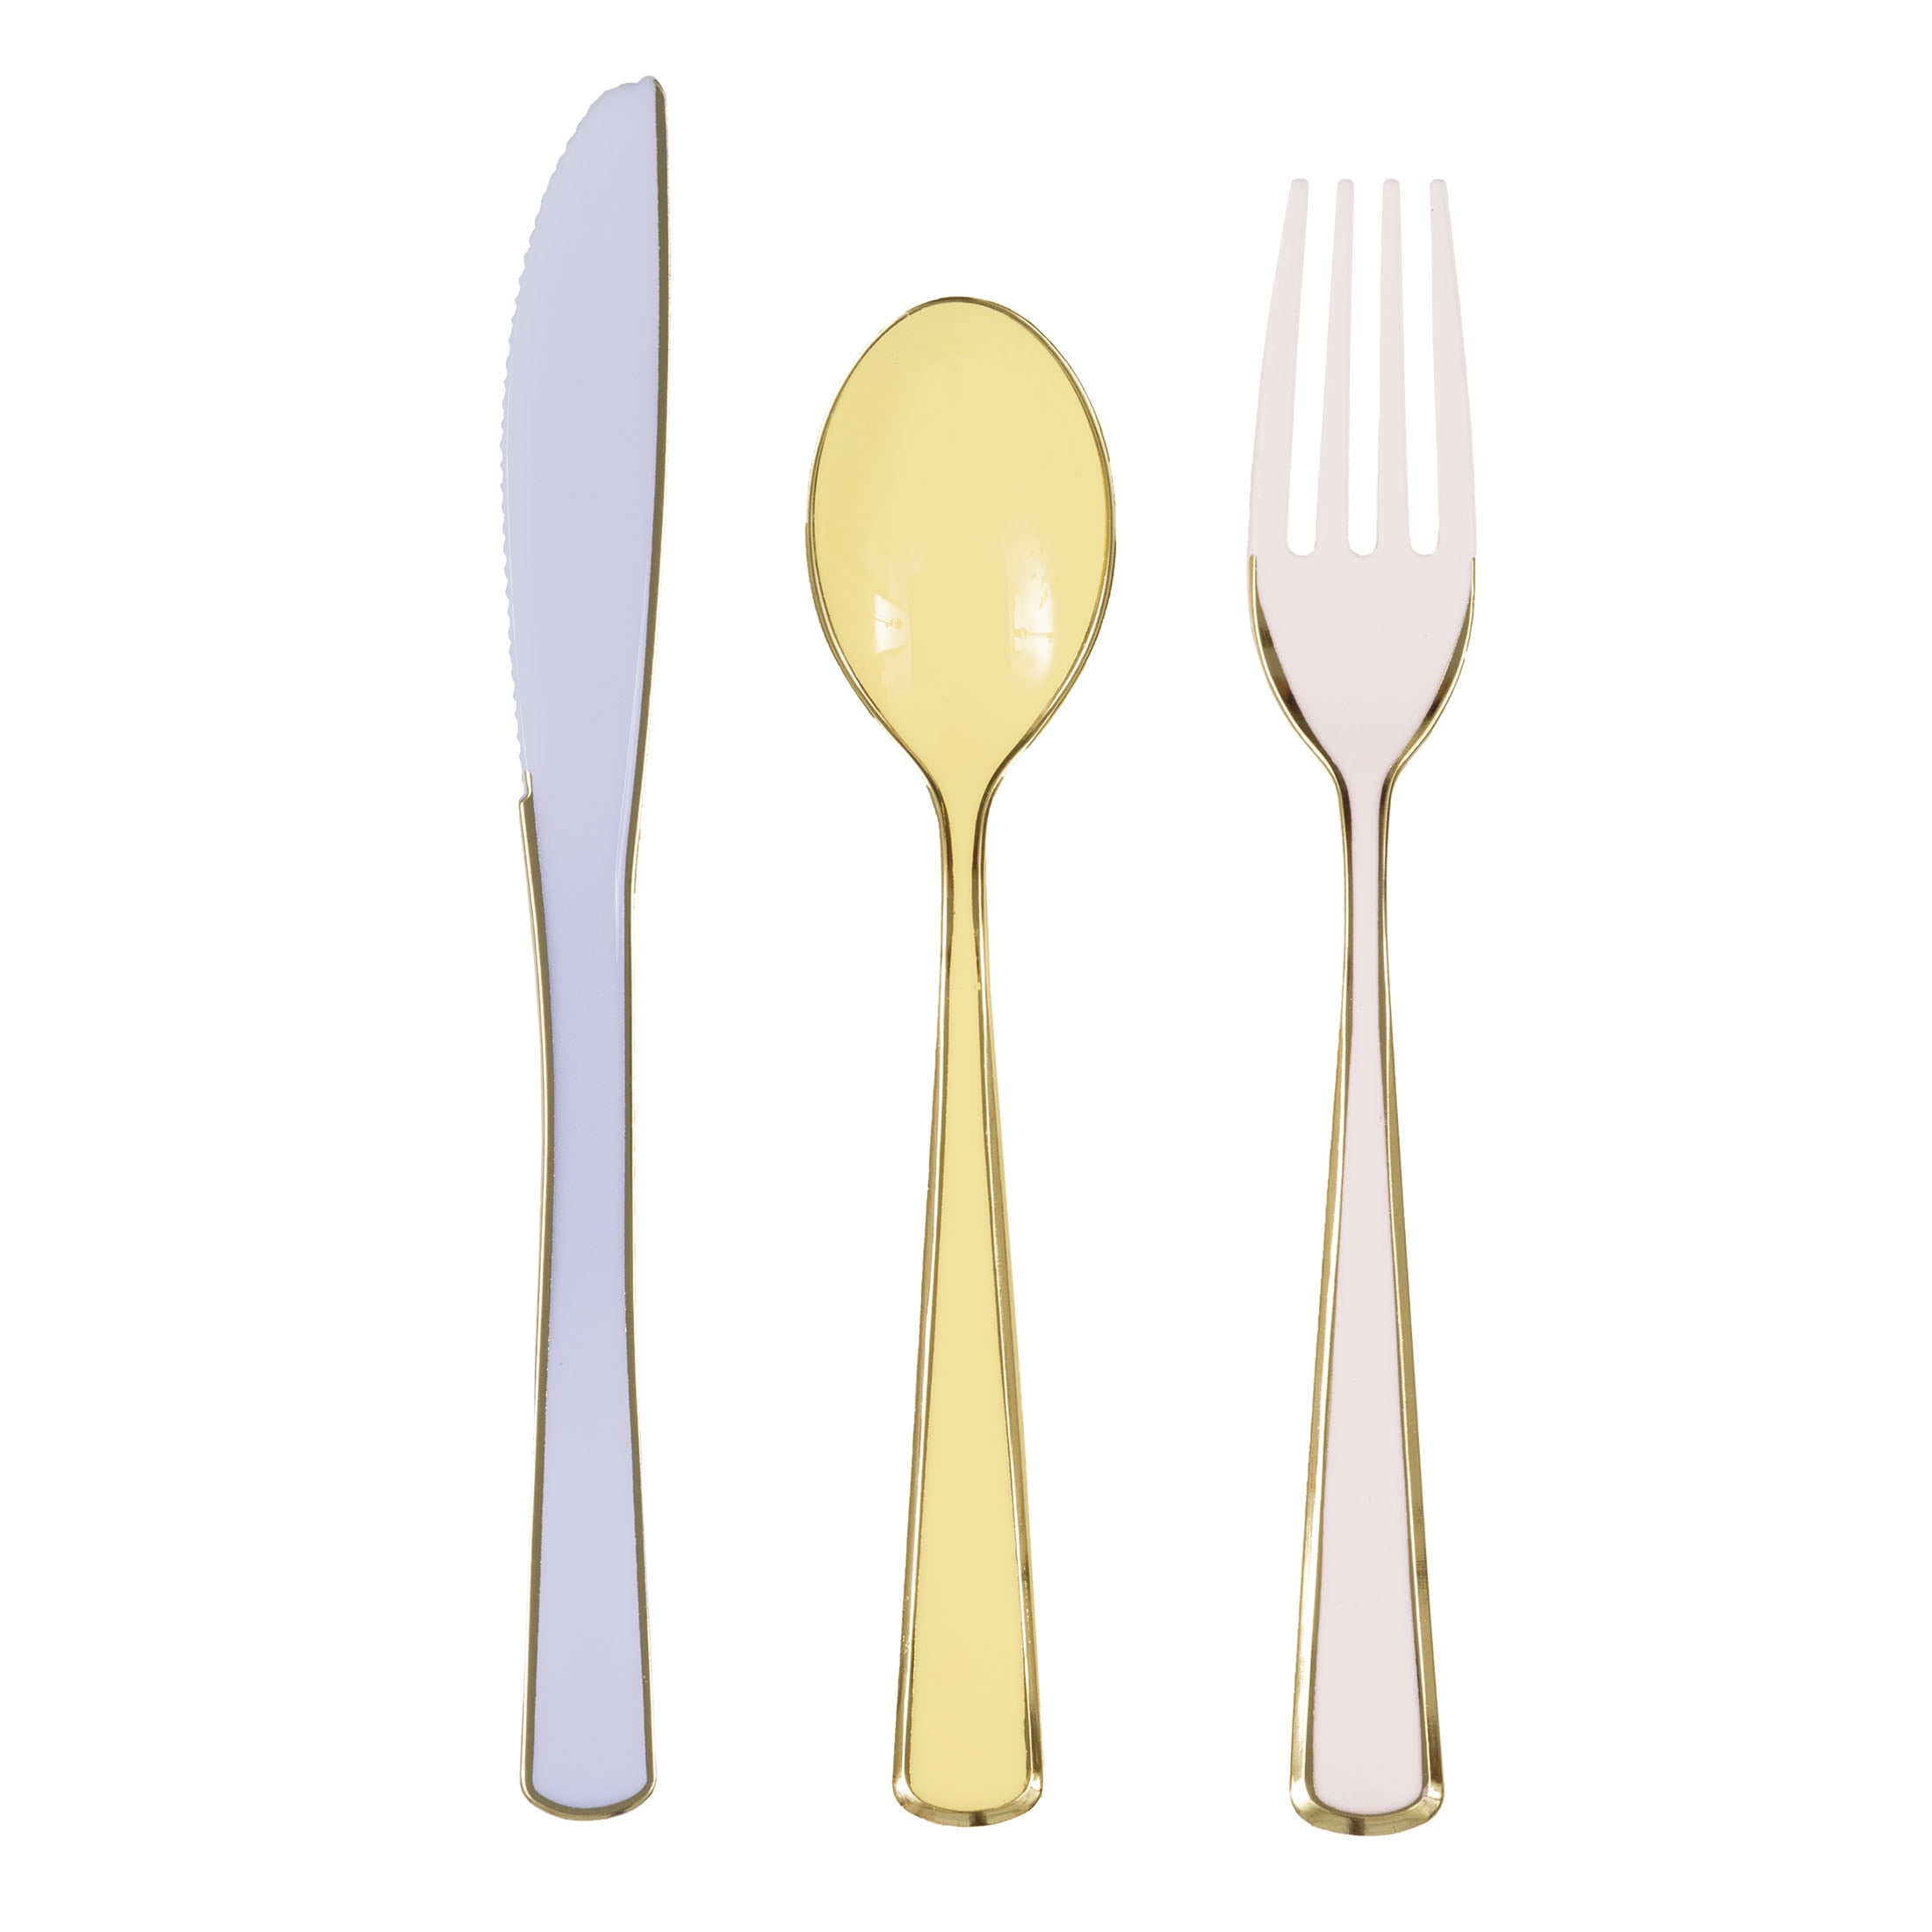 Way to Celebrate! Foil Gold & Pastel Plastic Cutlery Set for 6, 18pcs